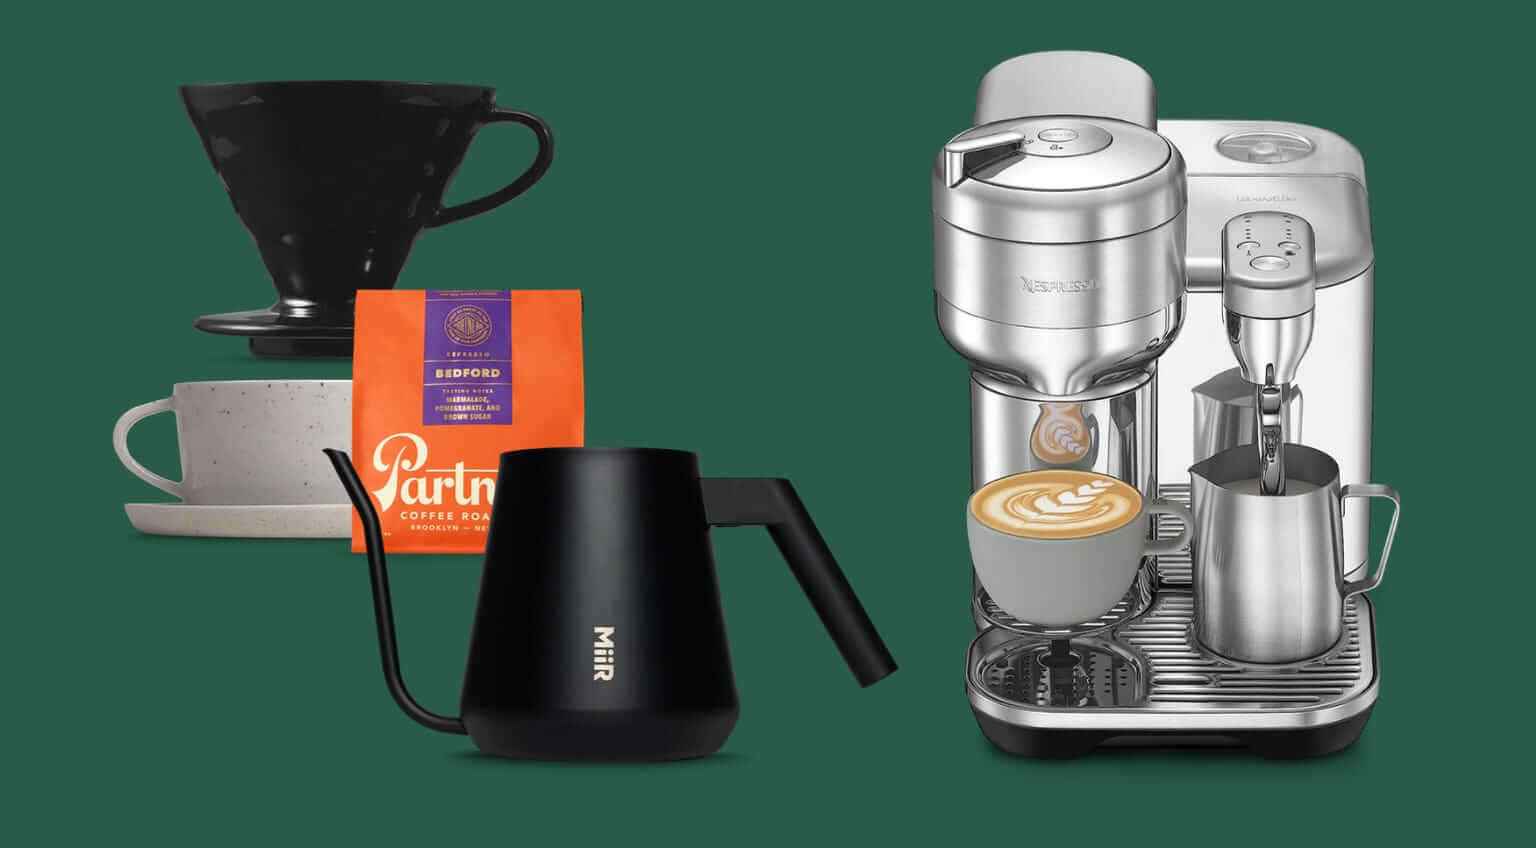 Holiday Gift Guide 2023: 30 Of The Best Coffee Gifts For Coffee Lovers  (2023) – Glossy Belle